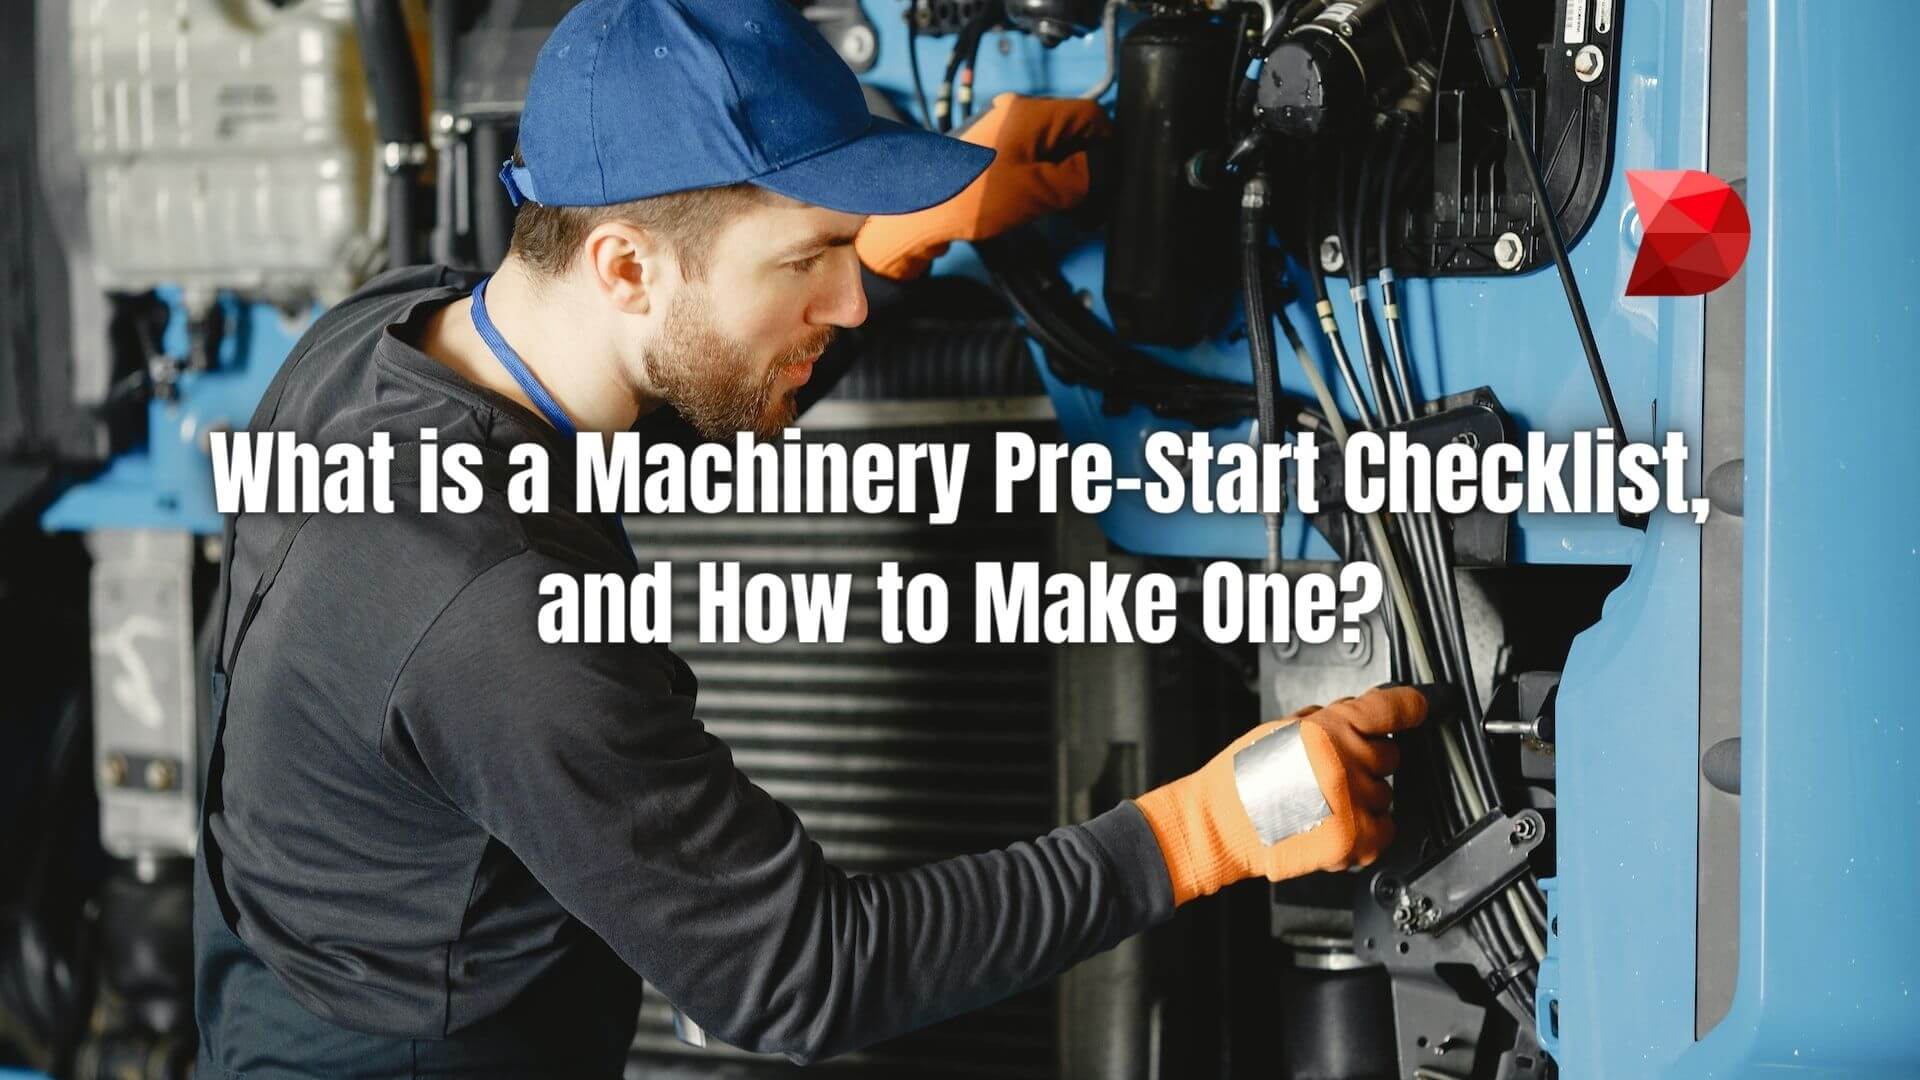 Machinery Pre-start Checklist are inspections that operators must complete before using machinery or equipment. Here's how to make one!